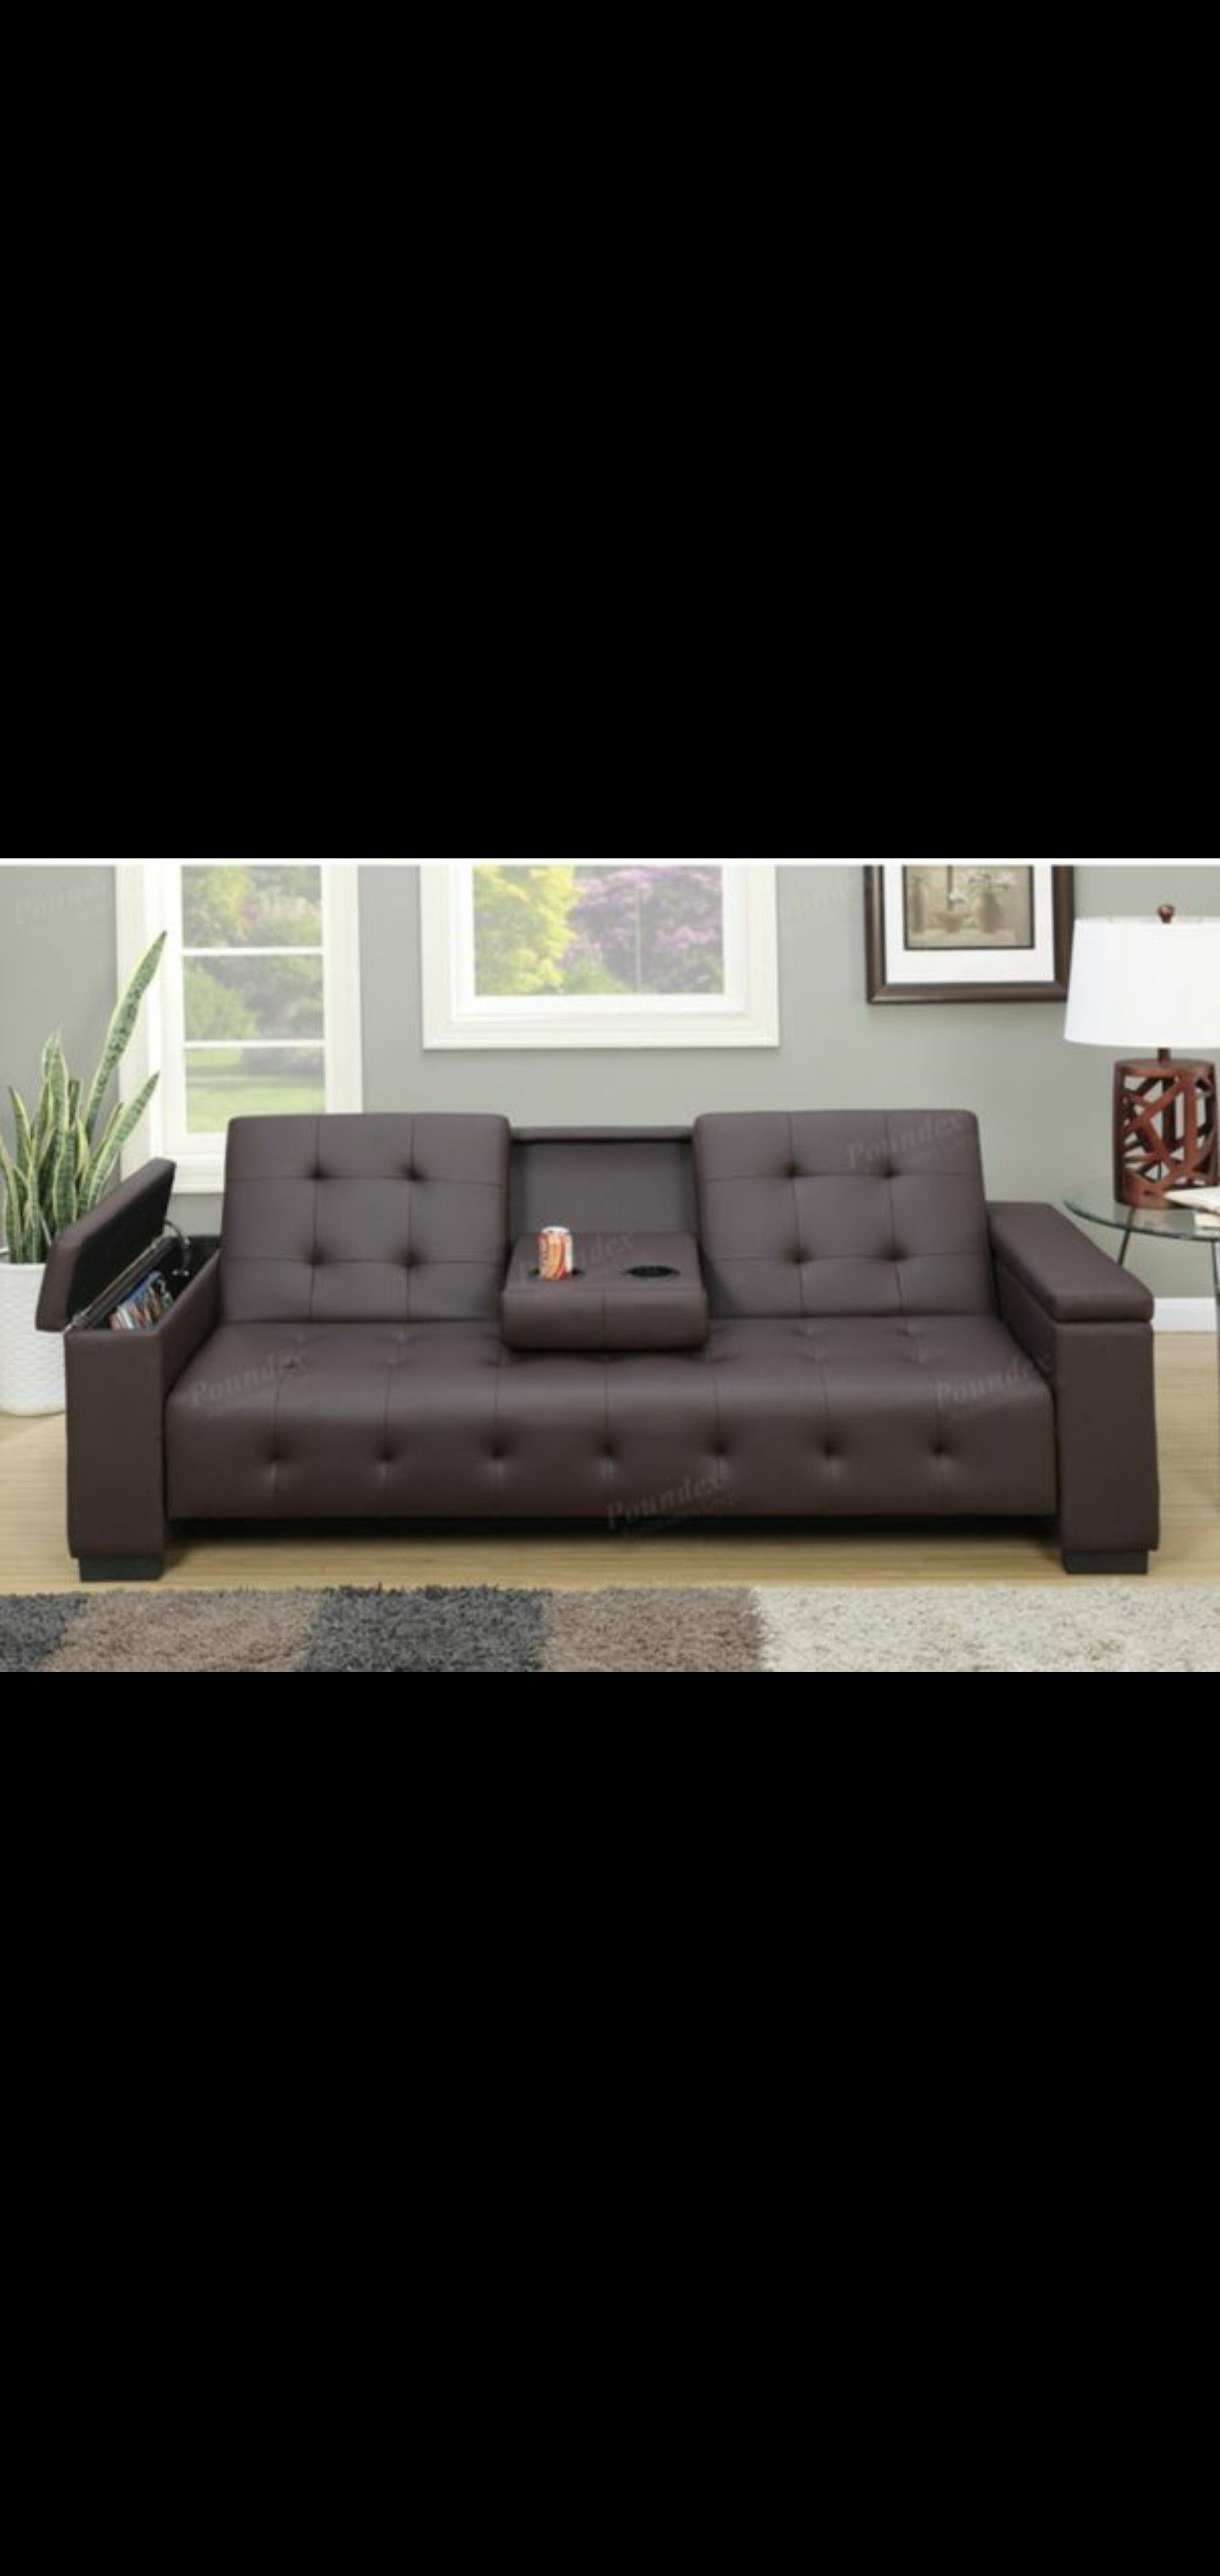 leather folding futon sofa bed with storage in the arms